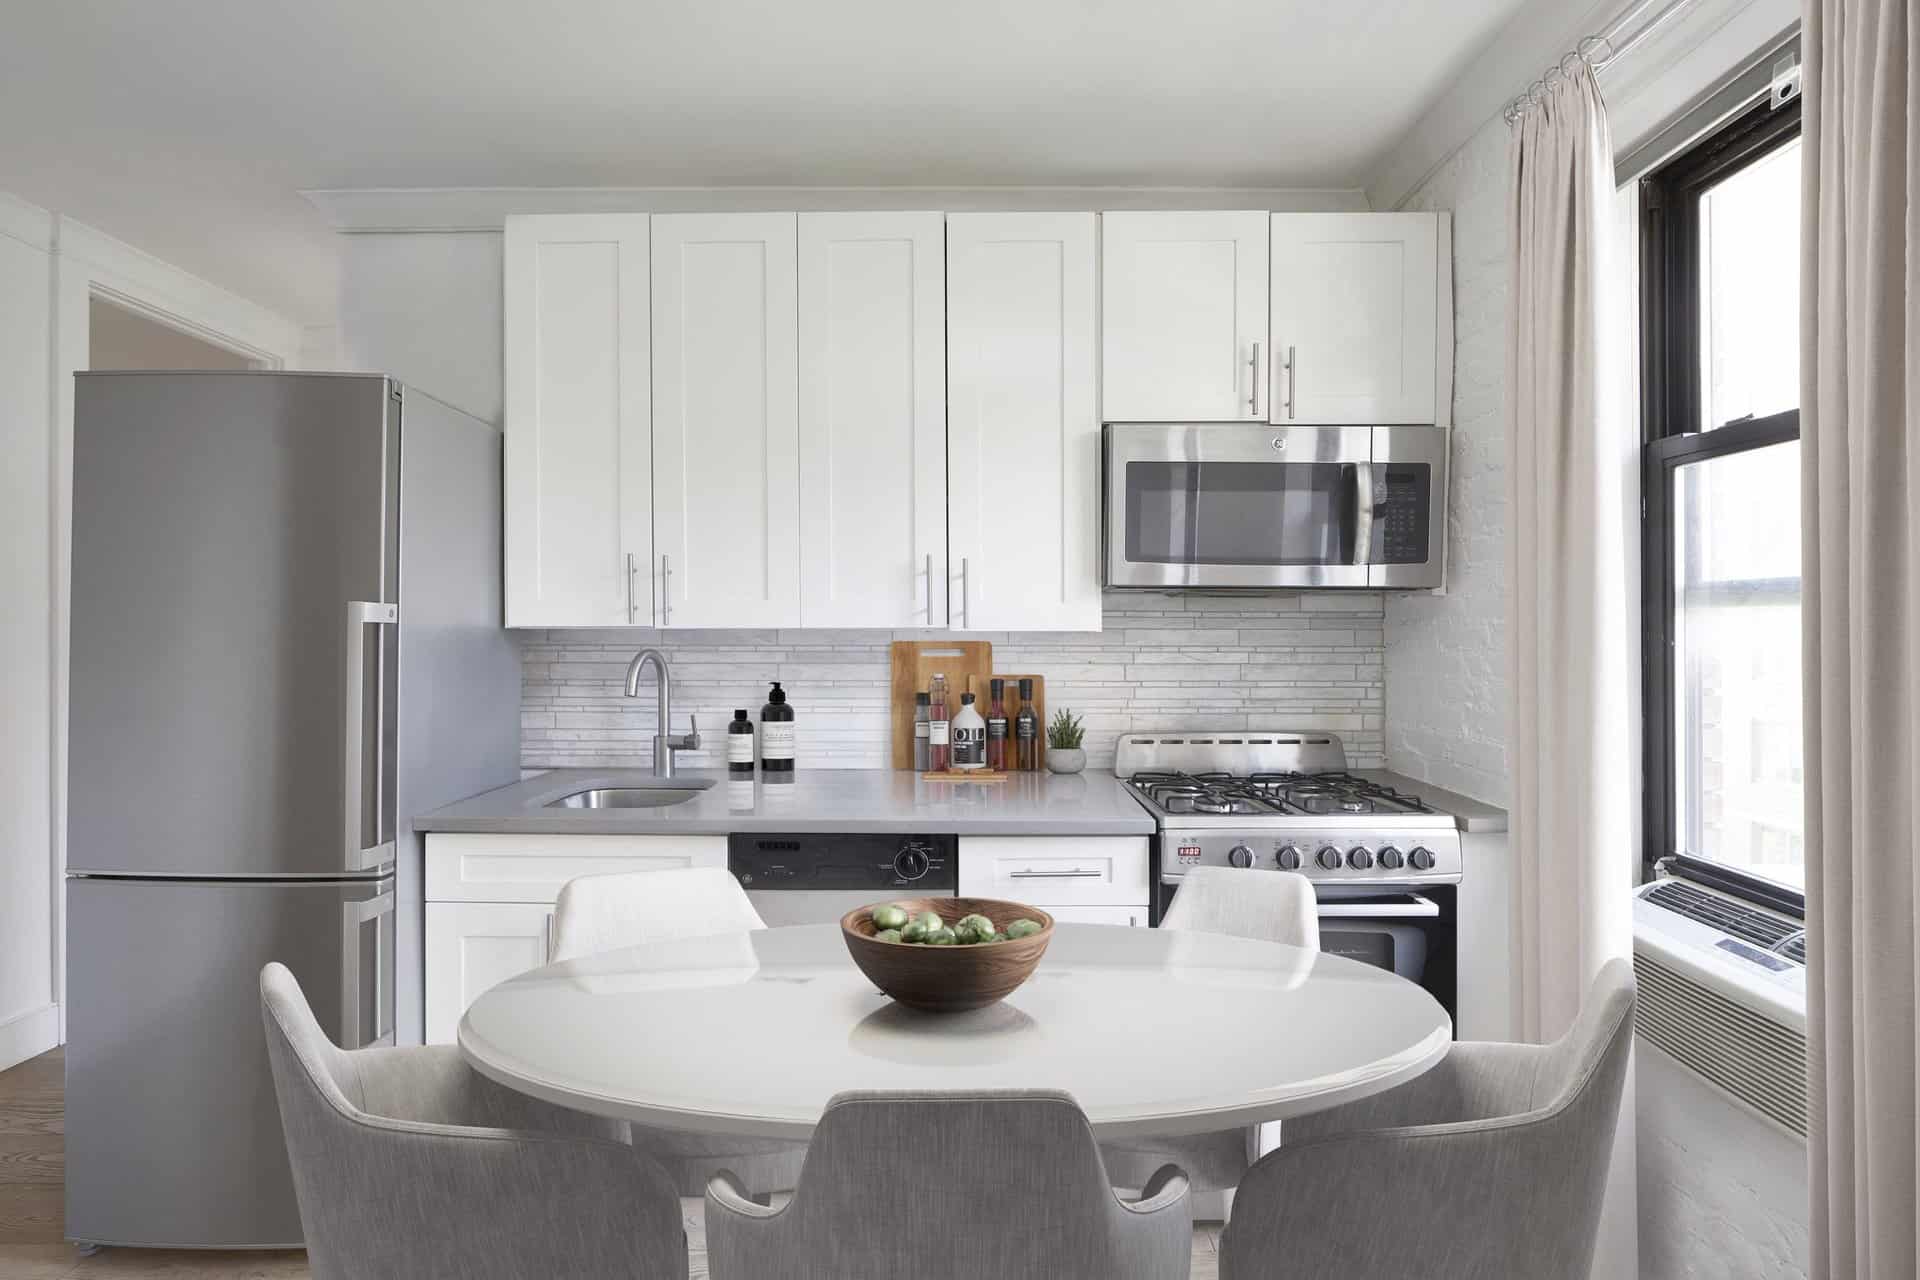 Kitchen at 245 East 30th Street apartments in Kips Bay with stone countertops, stainless steel appliances & hardwood floors.